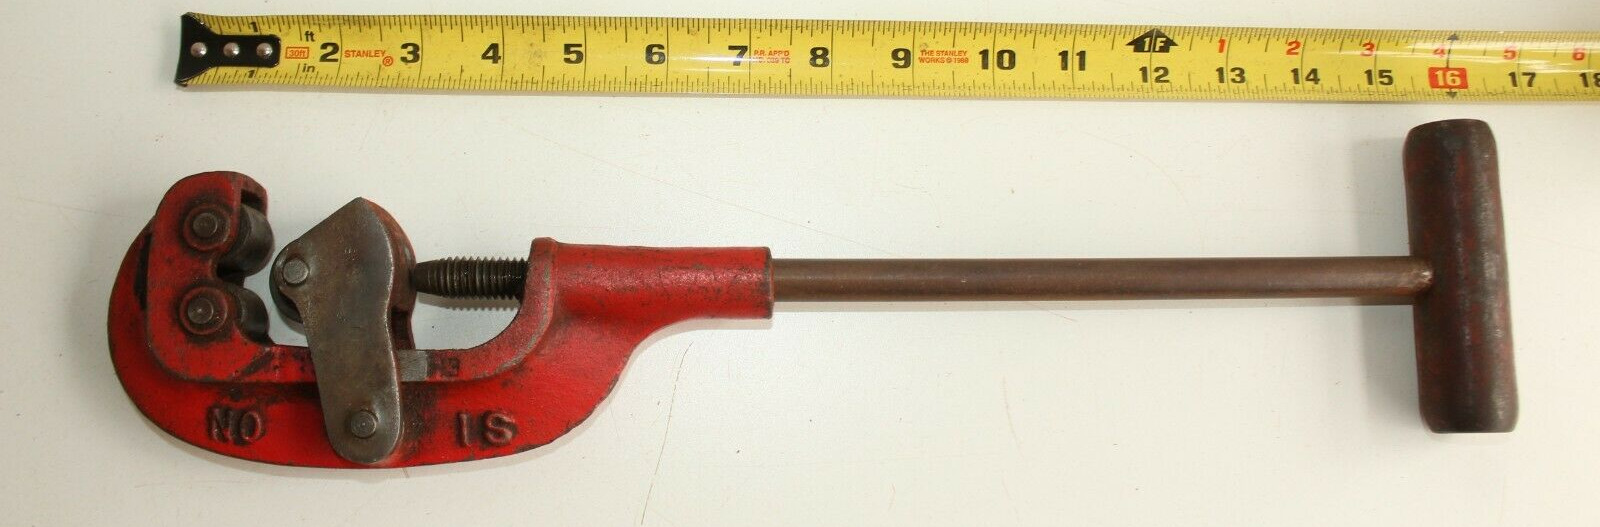 Vintage No. 1S Pipe tubing Cutter